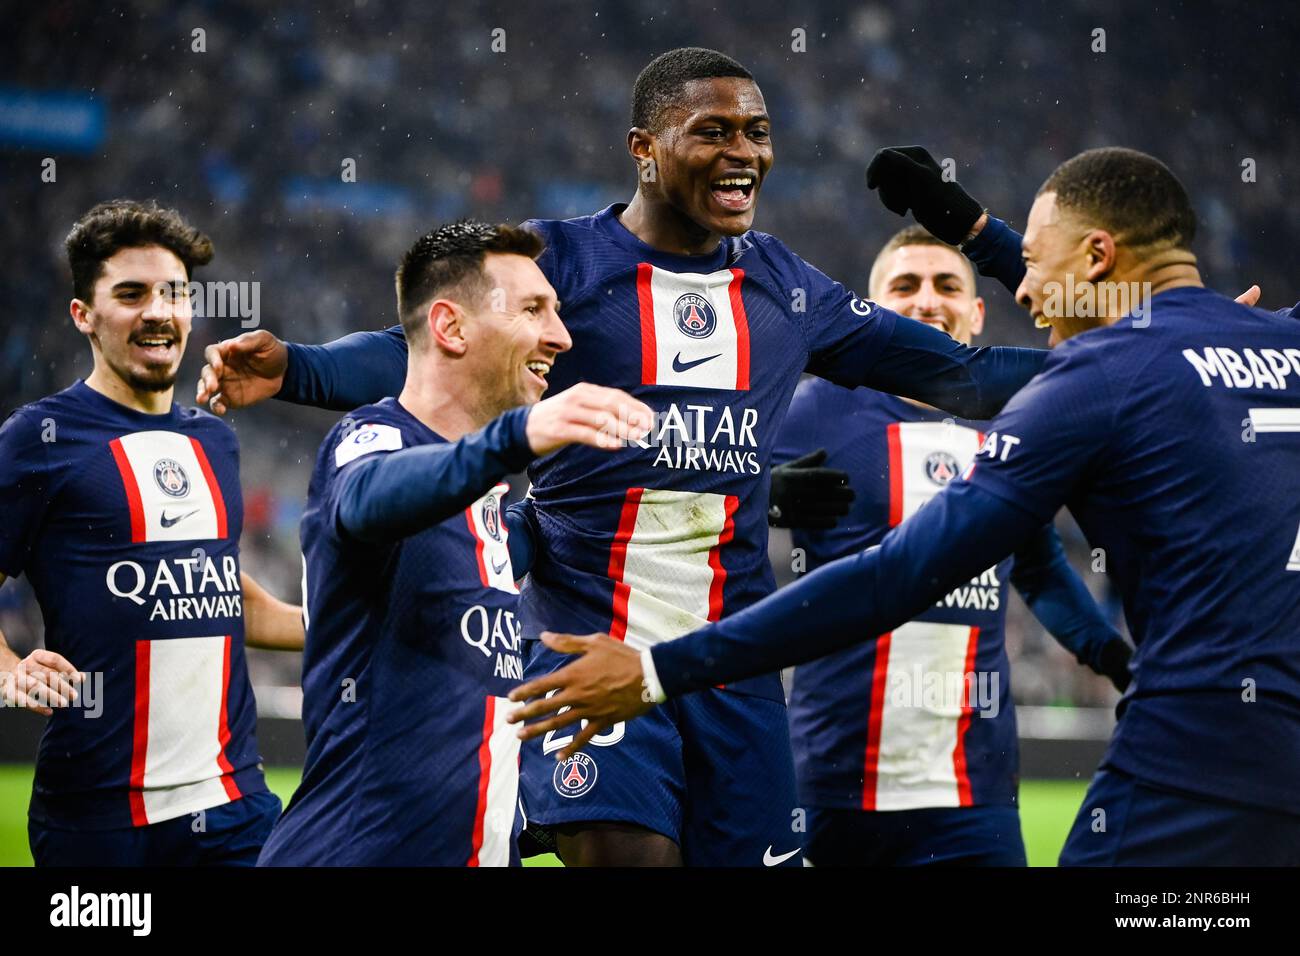 Marseille, France. 26th Feb, 2023. Paris Saint-Germain (PSG)'s Kylian Mbappe (1st R) and Lionel Messi (2nd L) celebrate their goal during a French Ligue 1 football match between Olympique de Marseille (OM) and Paris Saint-Germain (PSG) at the Velodrome stadium in Marseille, France, Feb. 26, 2023. Credit: Clement Mahoudeau/Xinhua/Alamy Live News Stock Photo